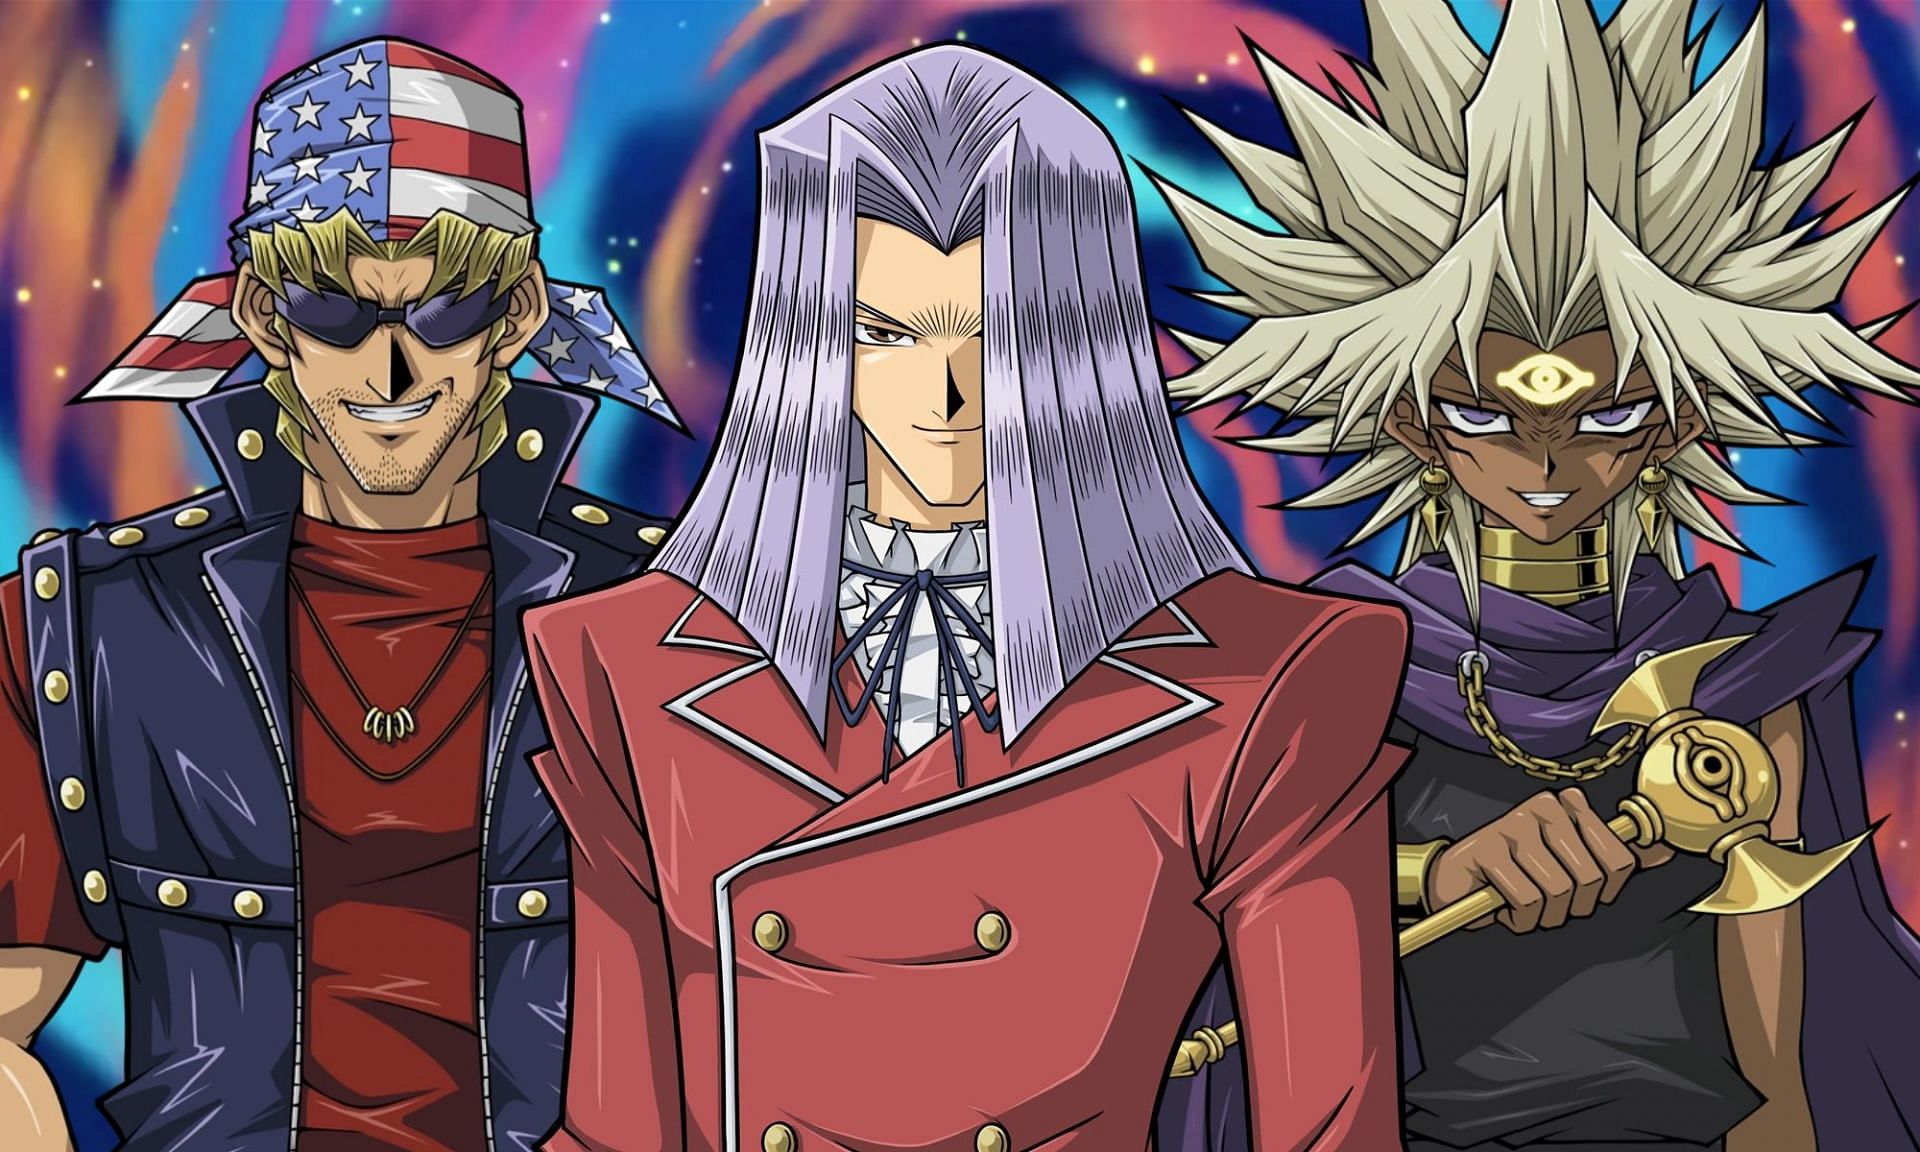 Every Original Yu-Gi-Oh Episode is Now Available on Streaming